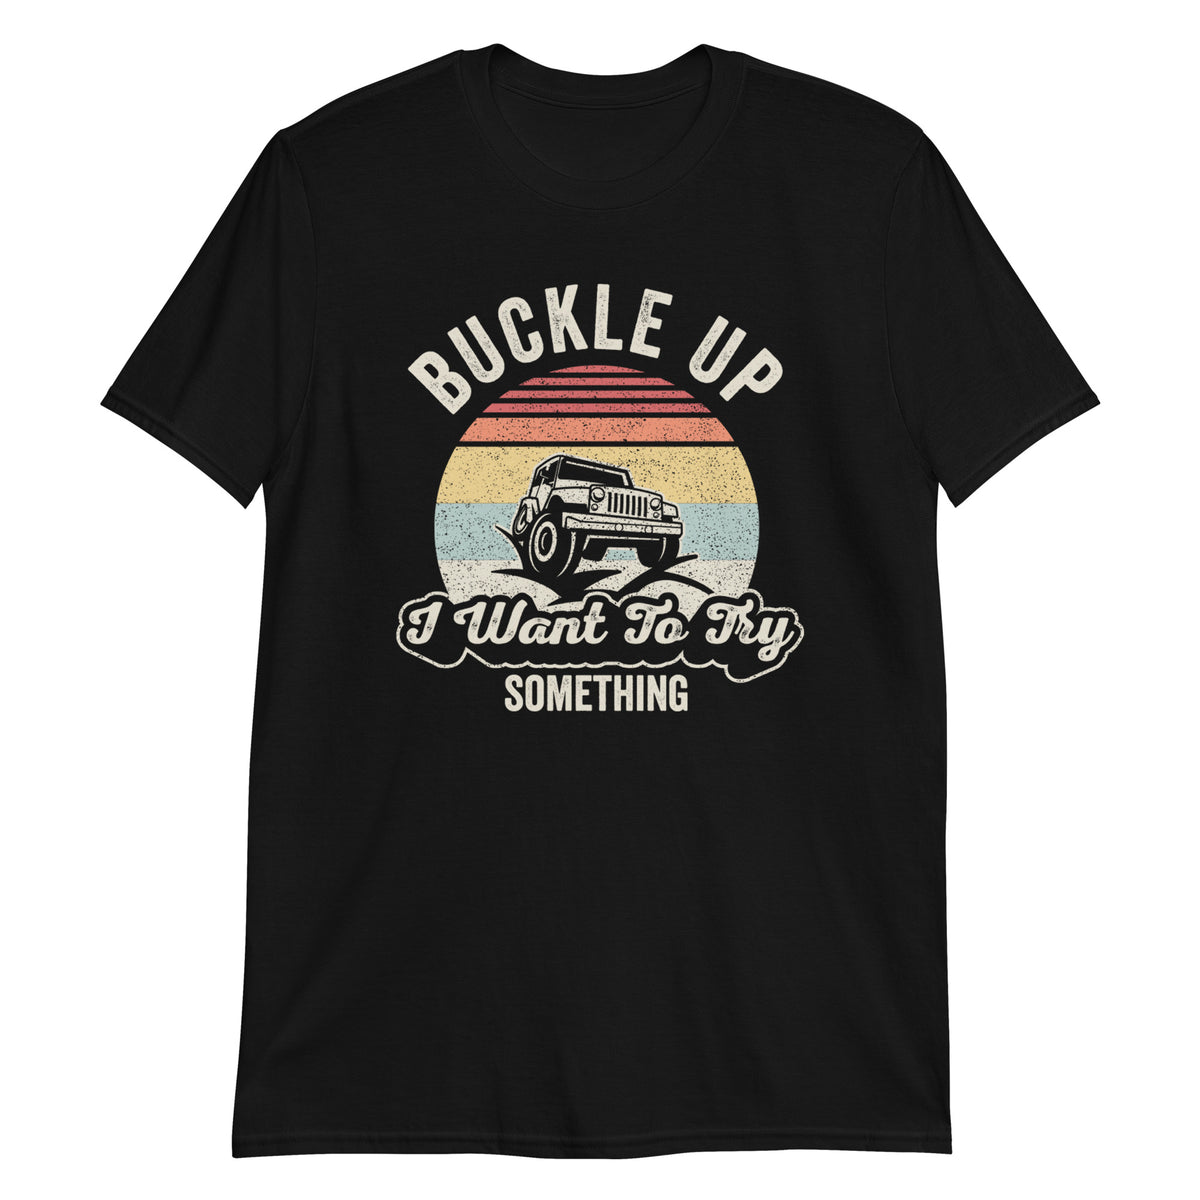 Buckle Up I Want To Try Something Offroad 4x4 Gift Retro Vintage T-Shirt